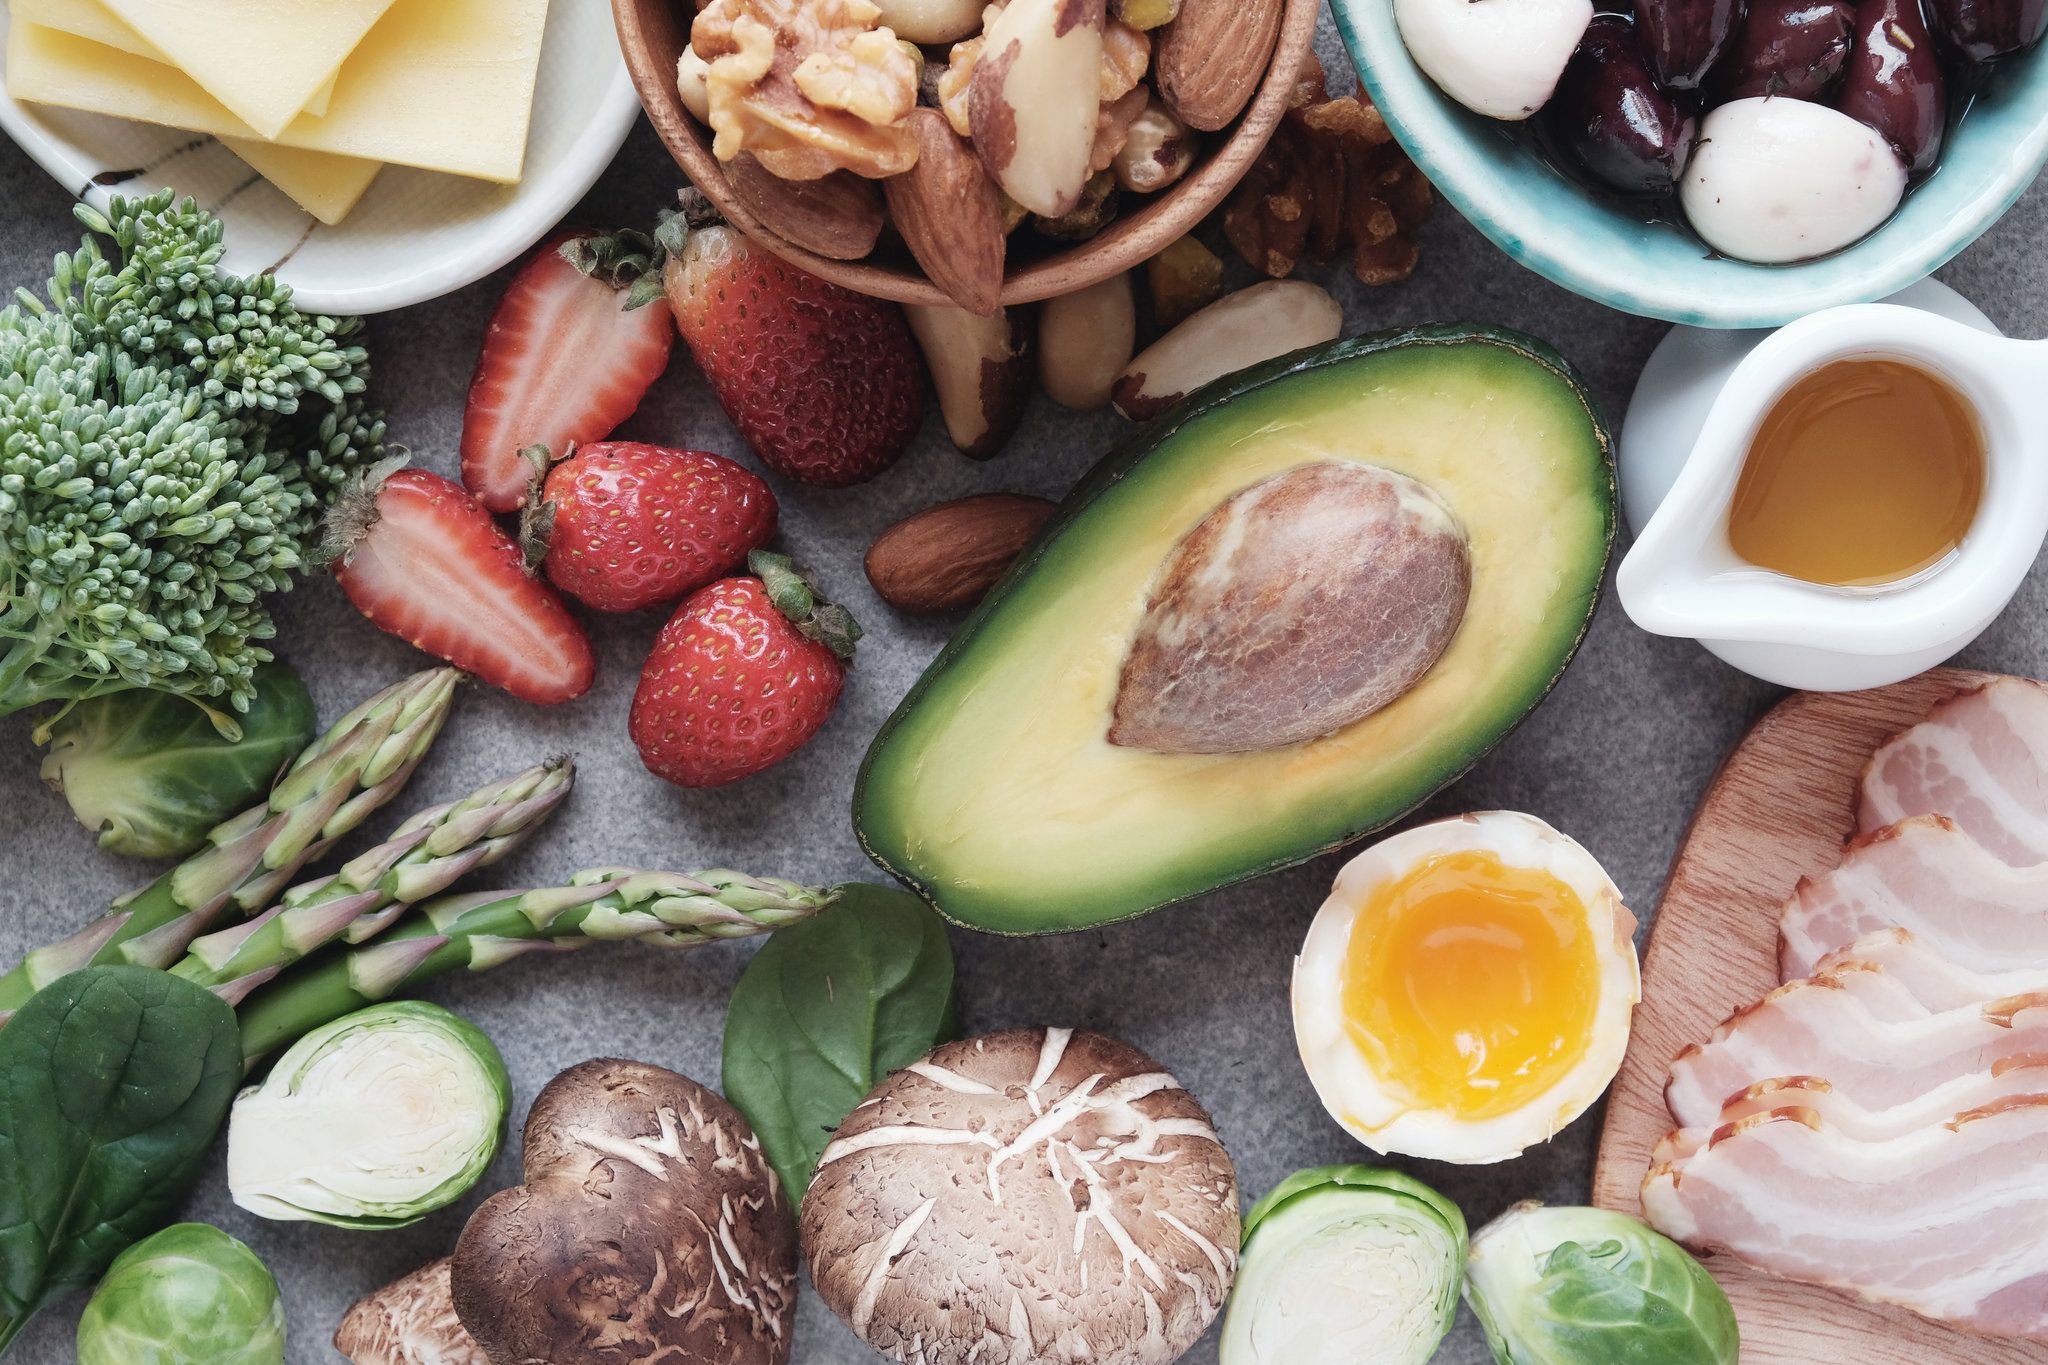 The Keto Diet Is Popular, but Is It Good for You?